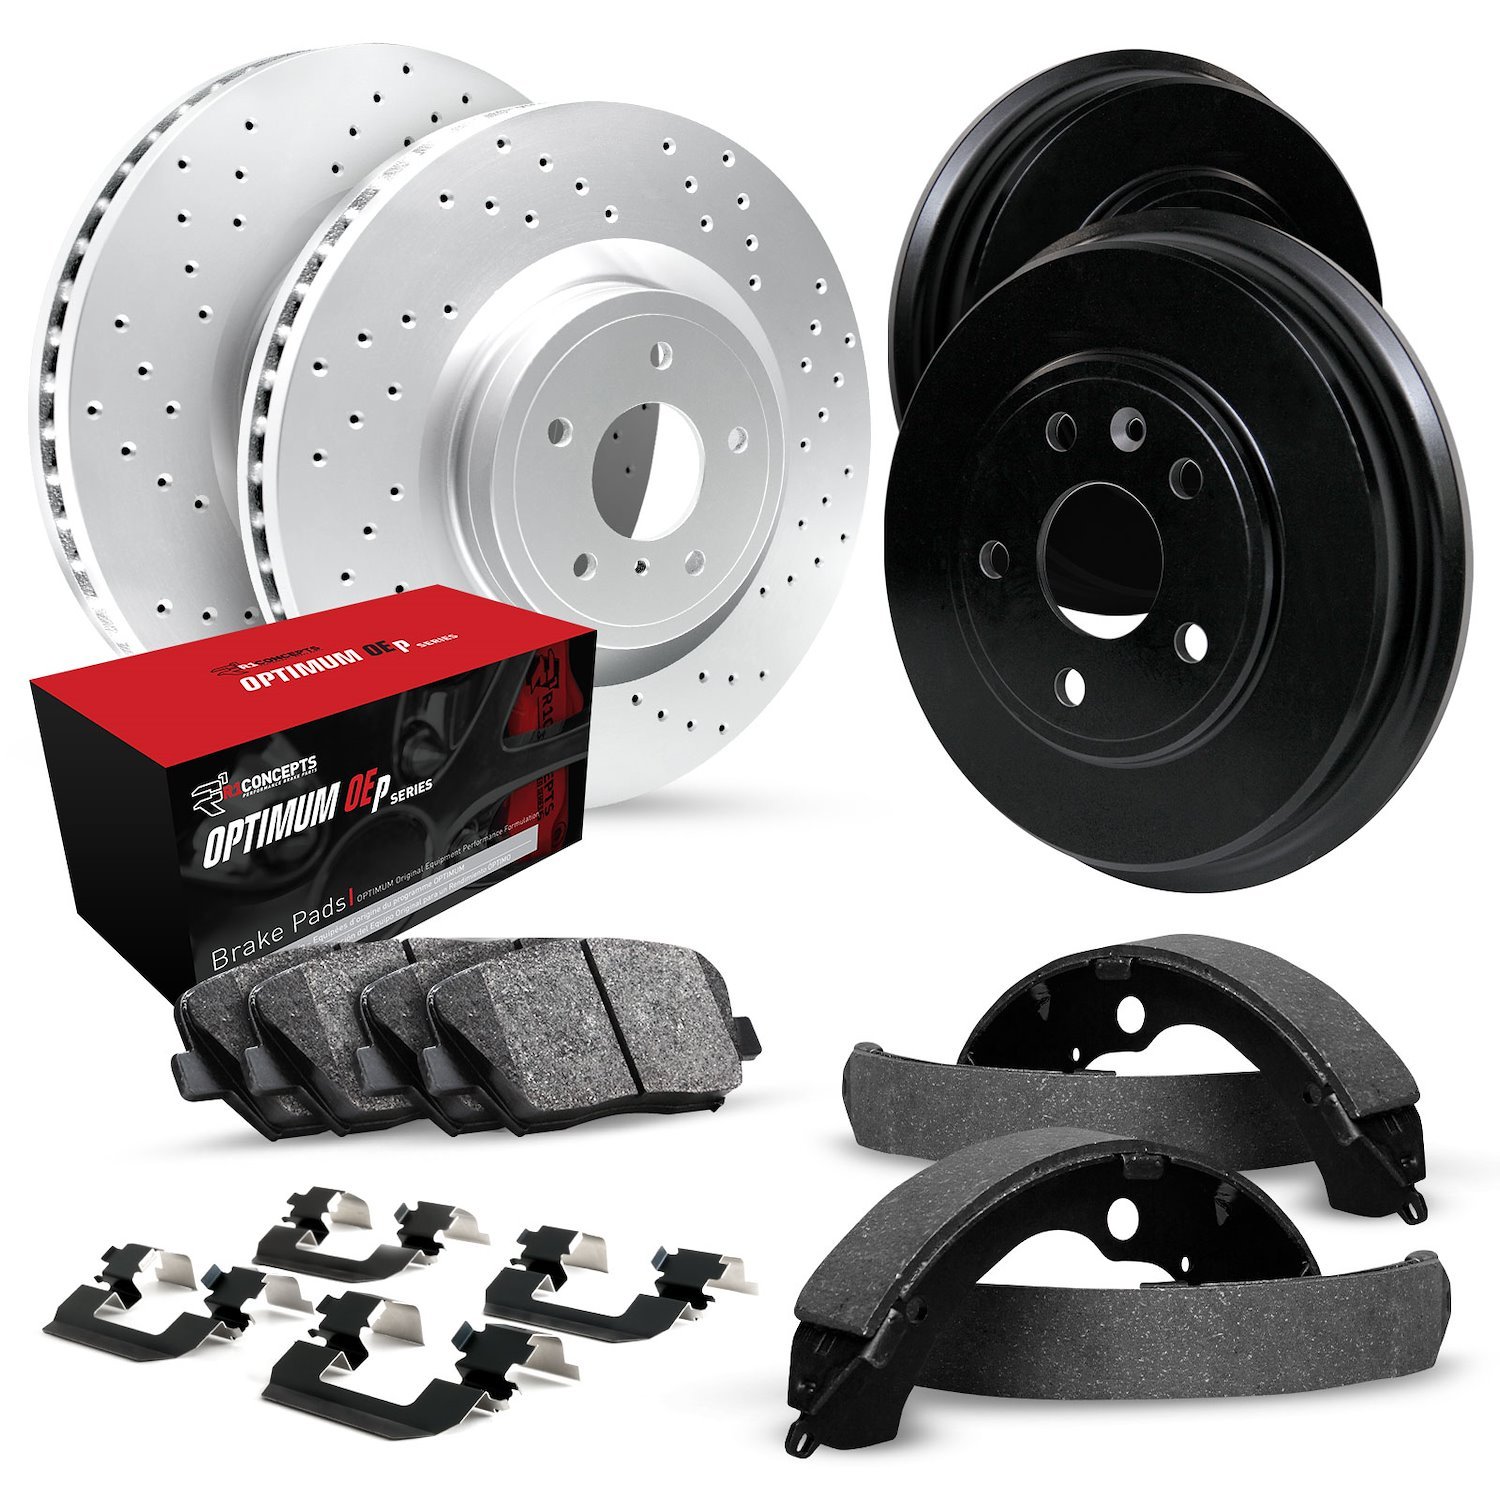 GEO-Carbon Drilled Brake Rotor & Drum Set w/Optimum OE Pads, Shoes, & Hardware, 1995-2001 GM, Position: Front & Rear